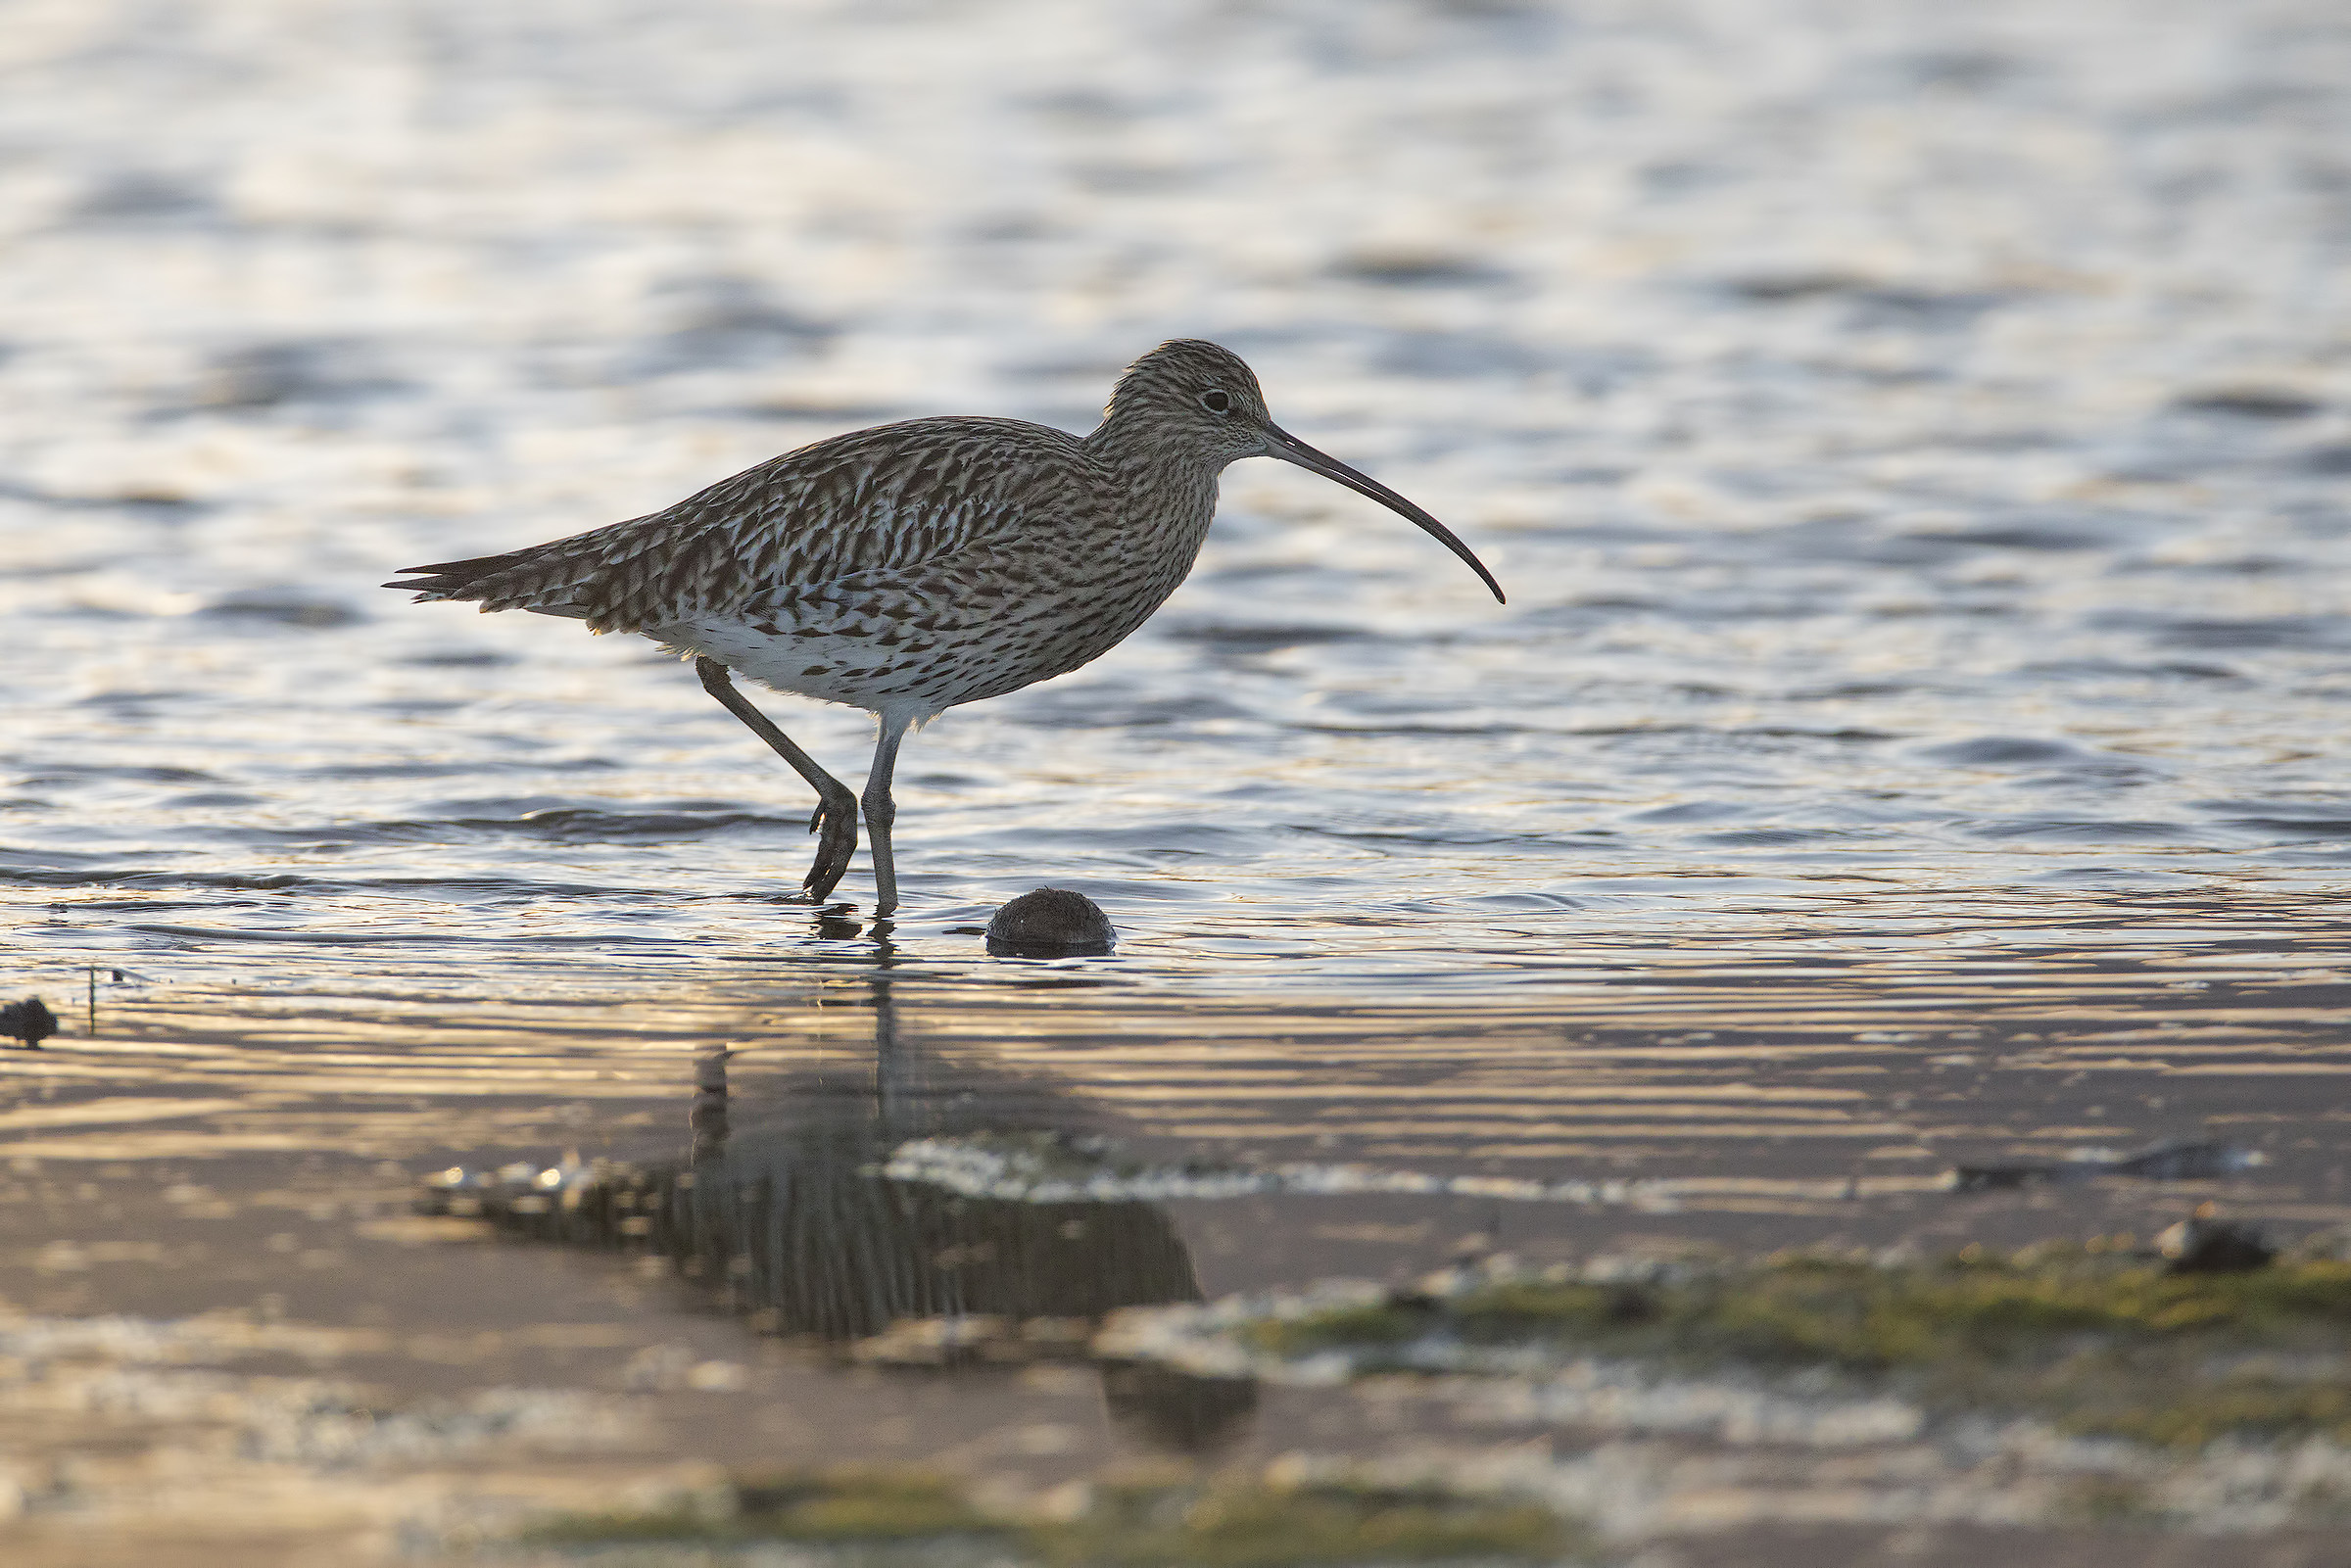 Curlew at sunset...